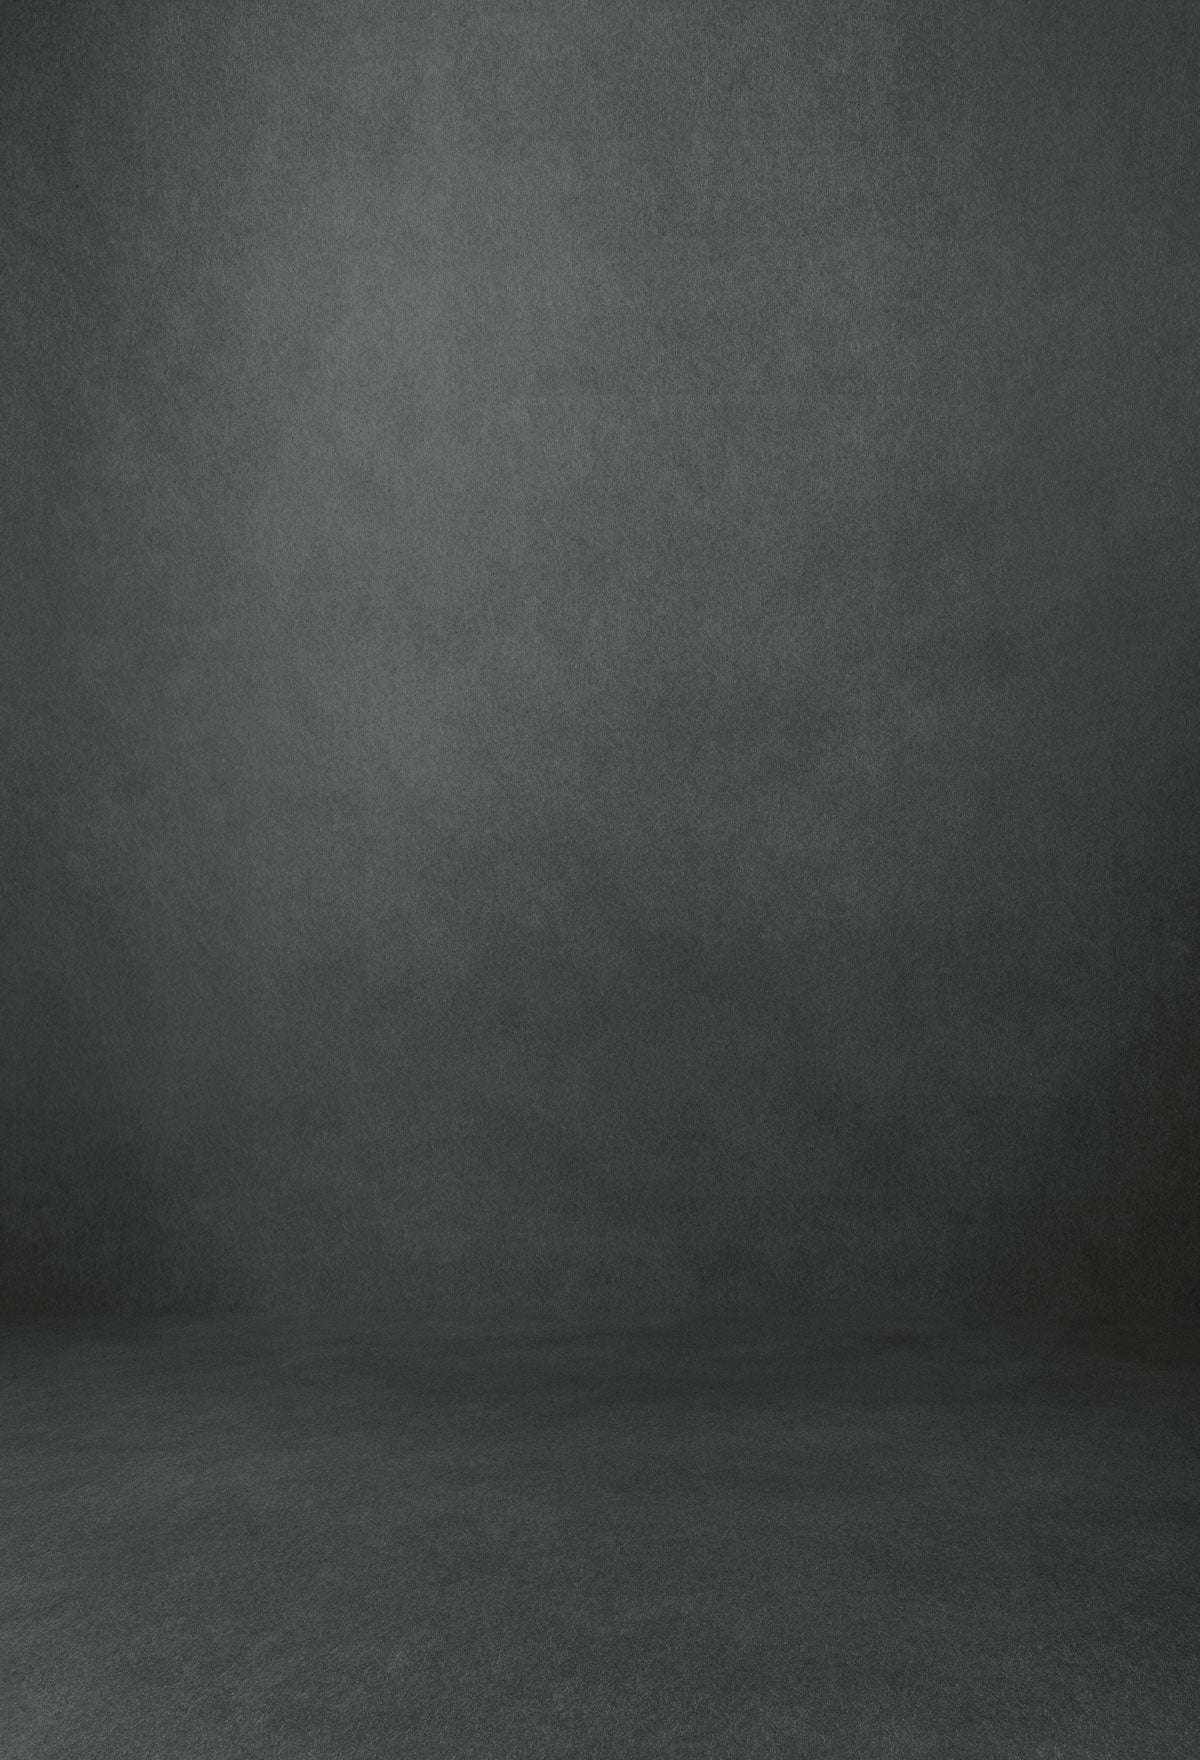 Kate Light Grey-3 Cool Color Backdrop for Photography